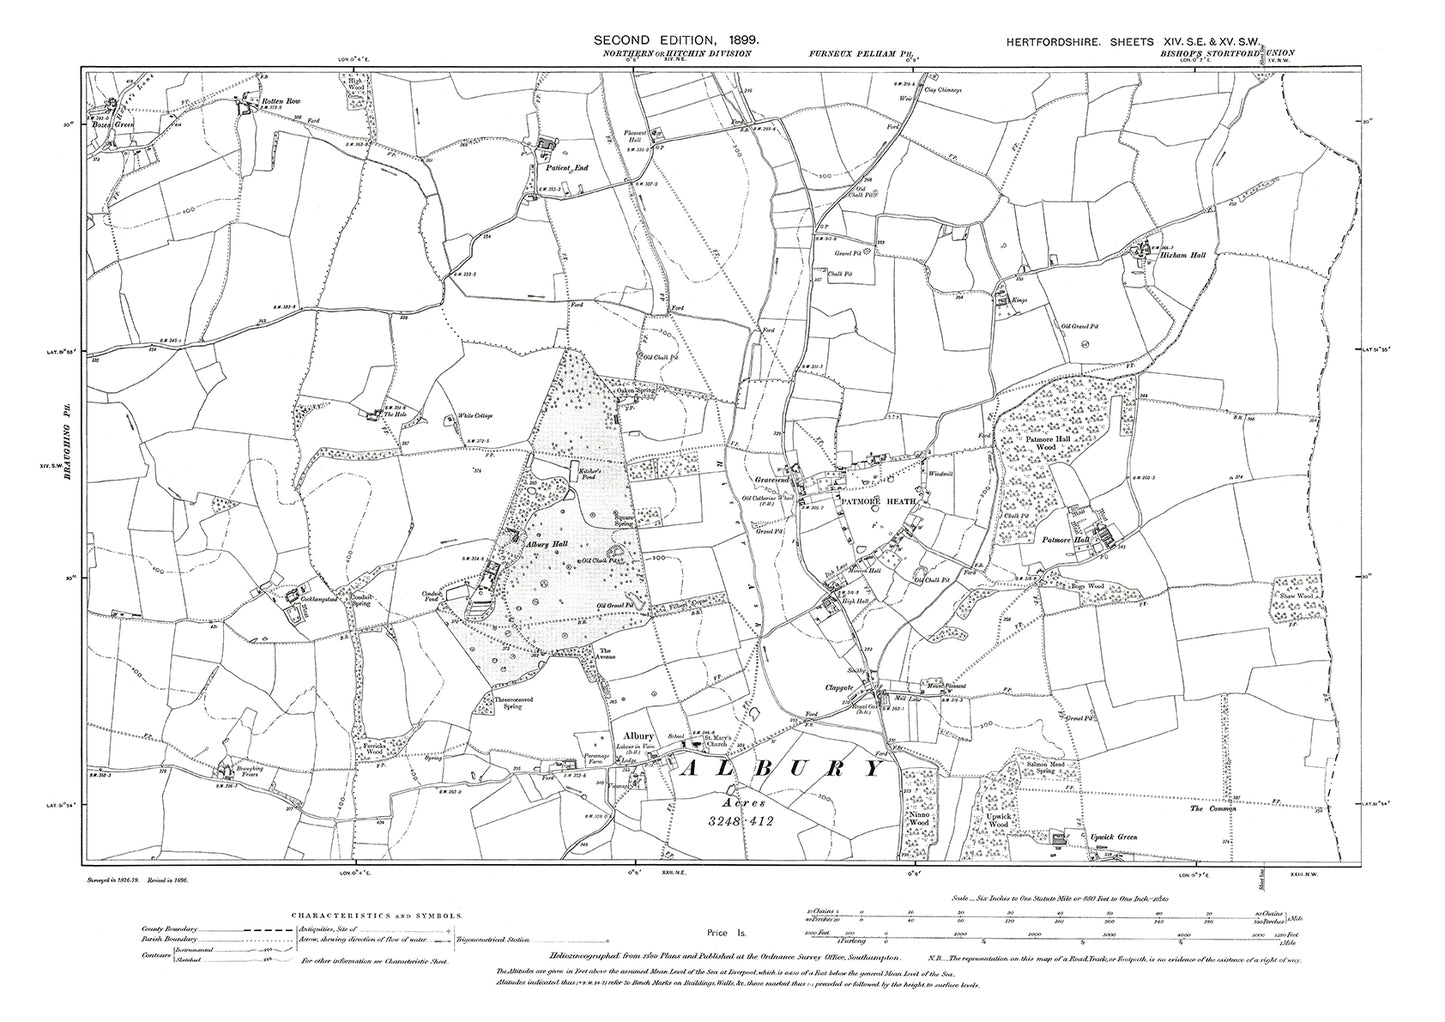 Old OS map dated 1899, showing Albury in Hertfordshire - 14SE-15SW